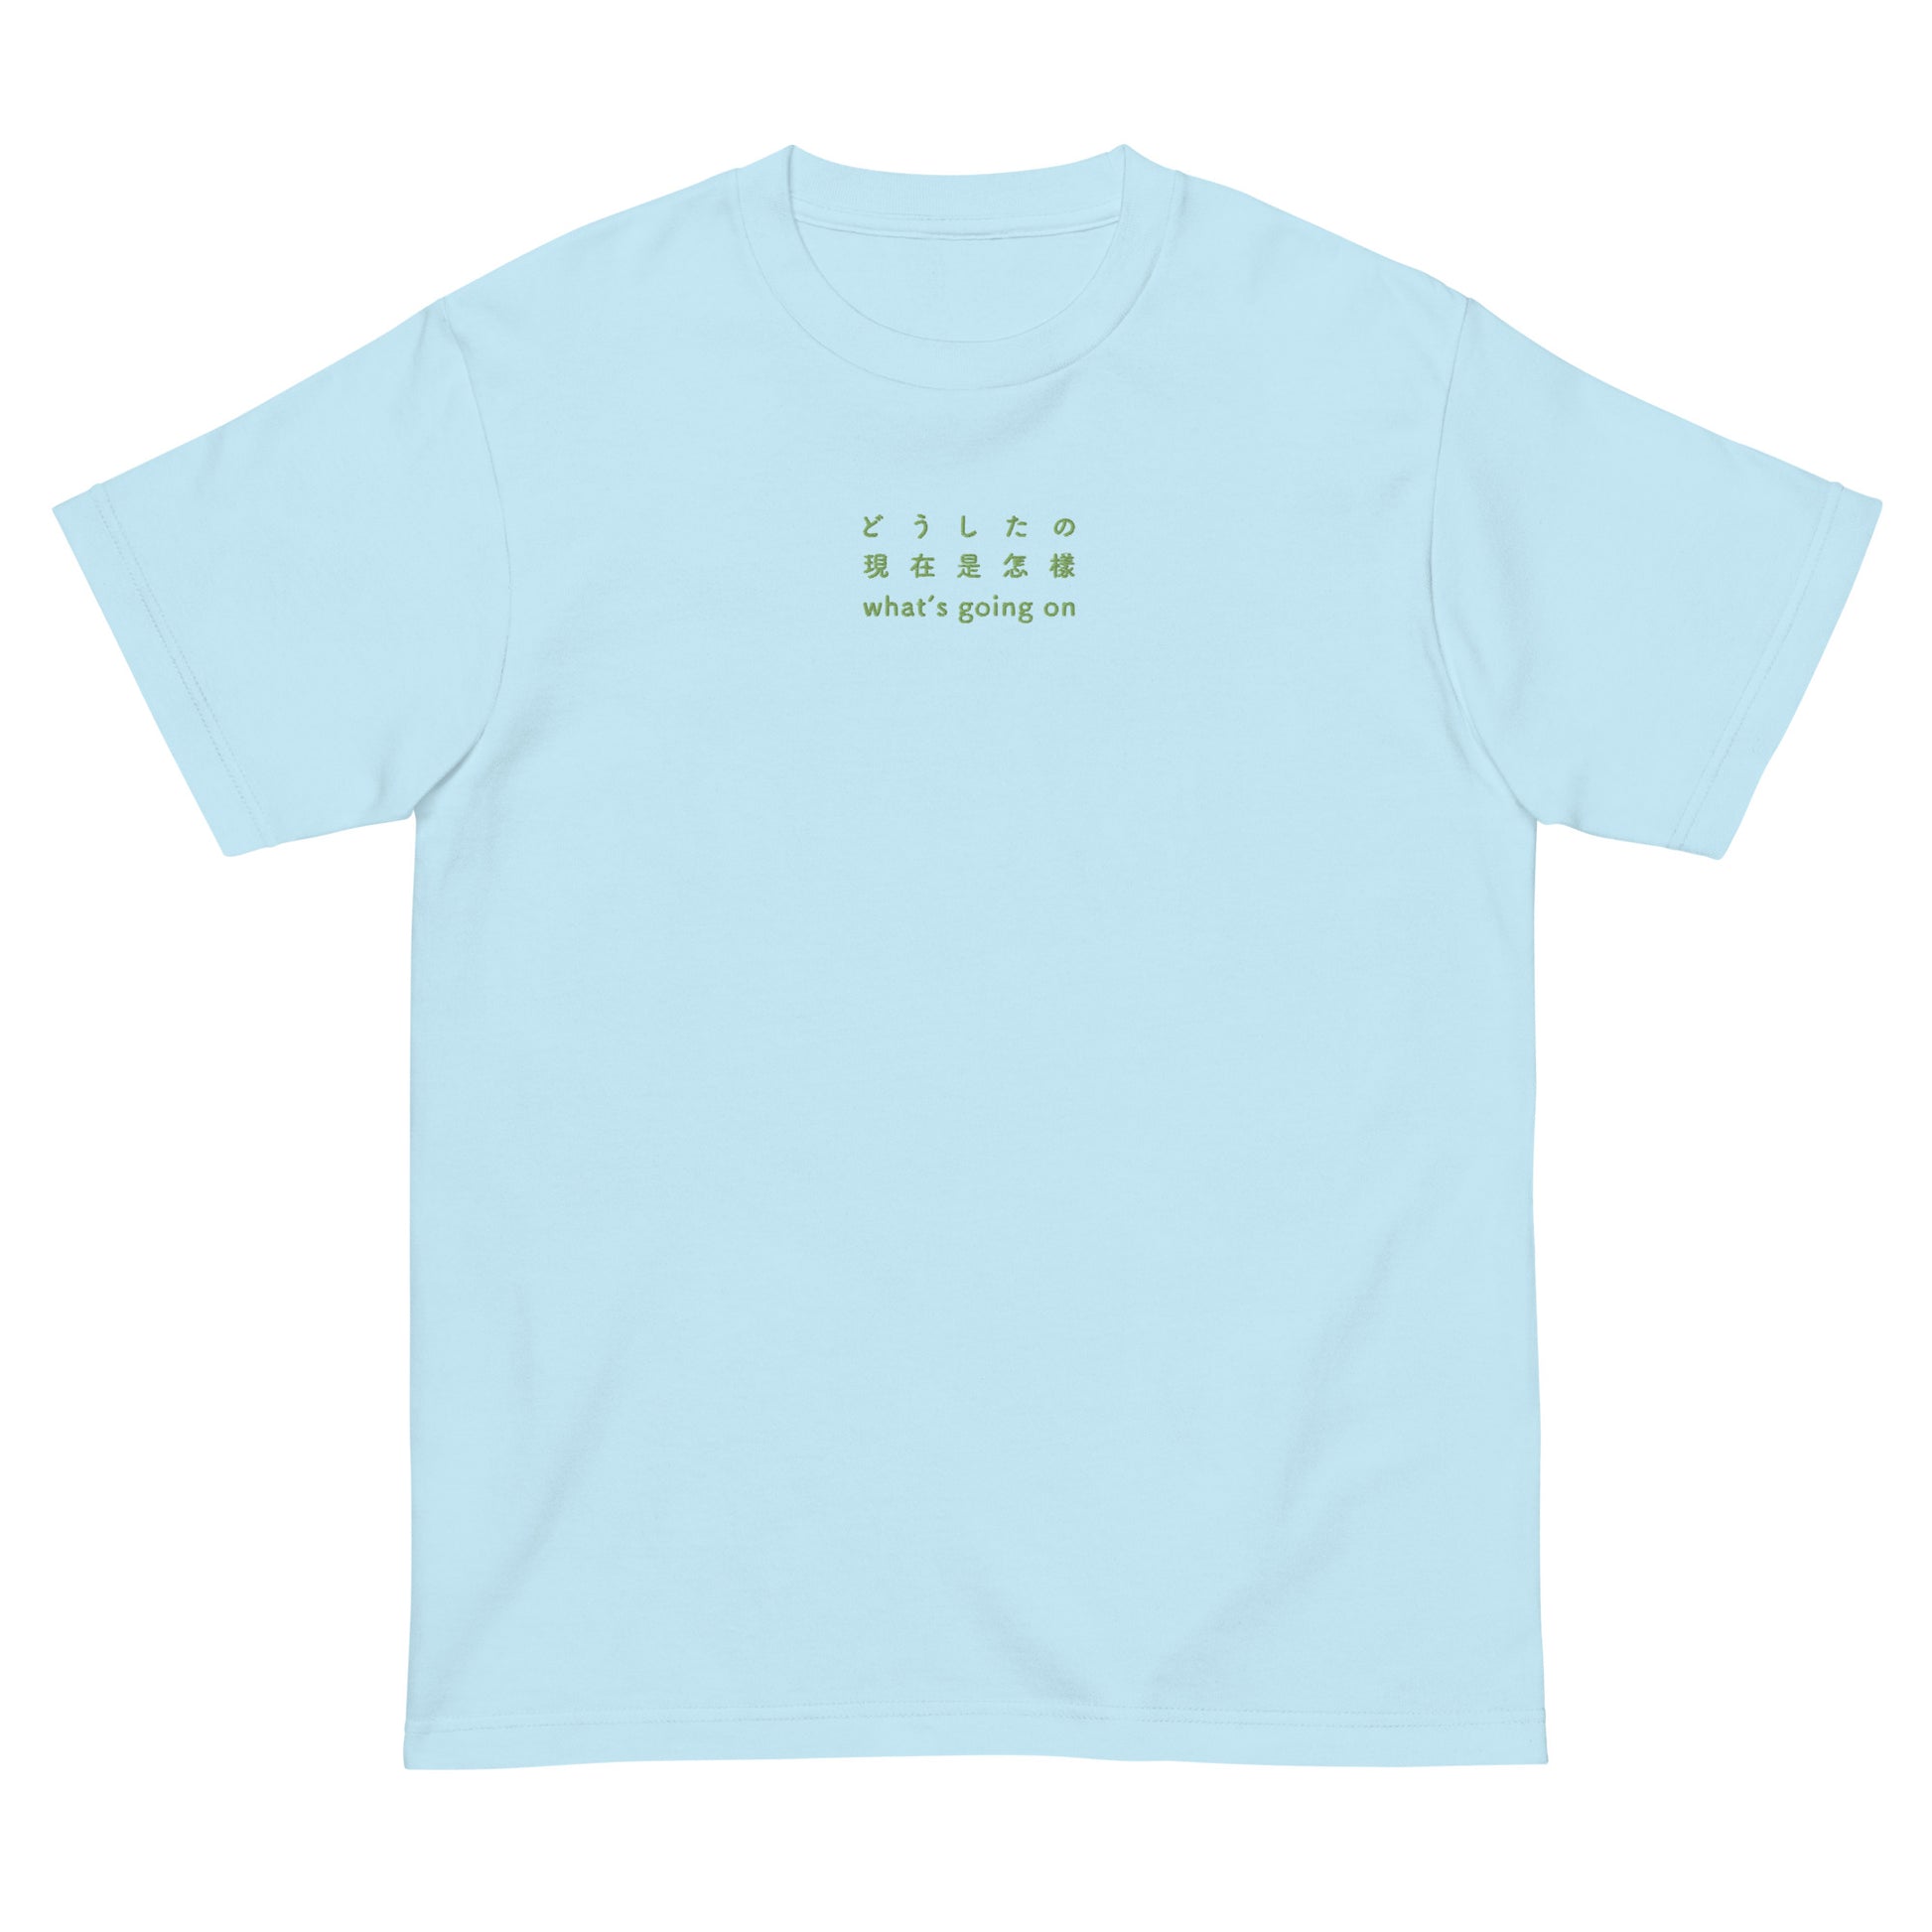 Light Blue High Quality Tee - Front Design with an Green Embroidery "What's going on" in Japanese,Chinese and English